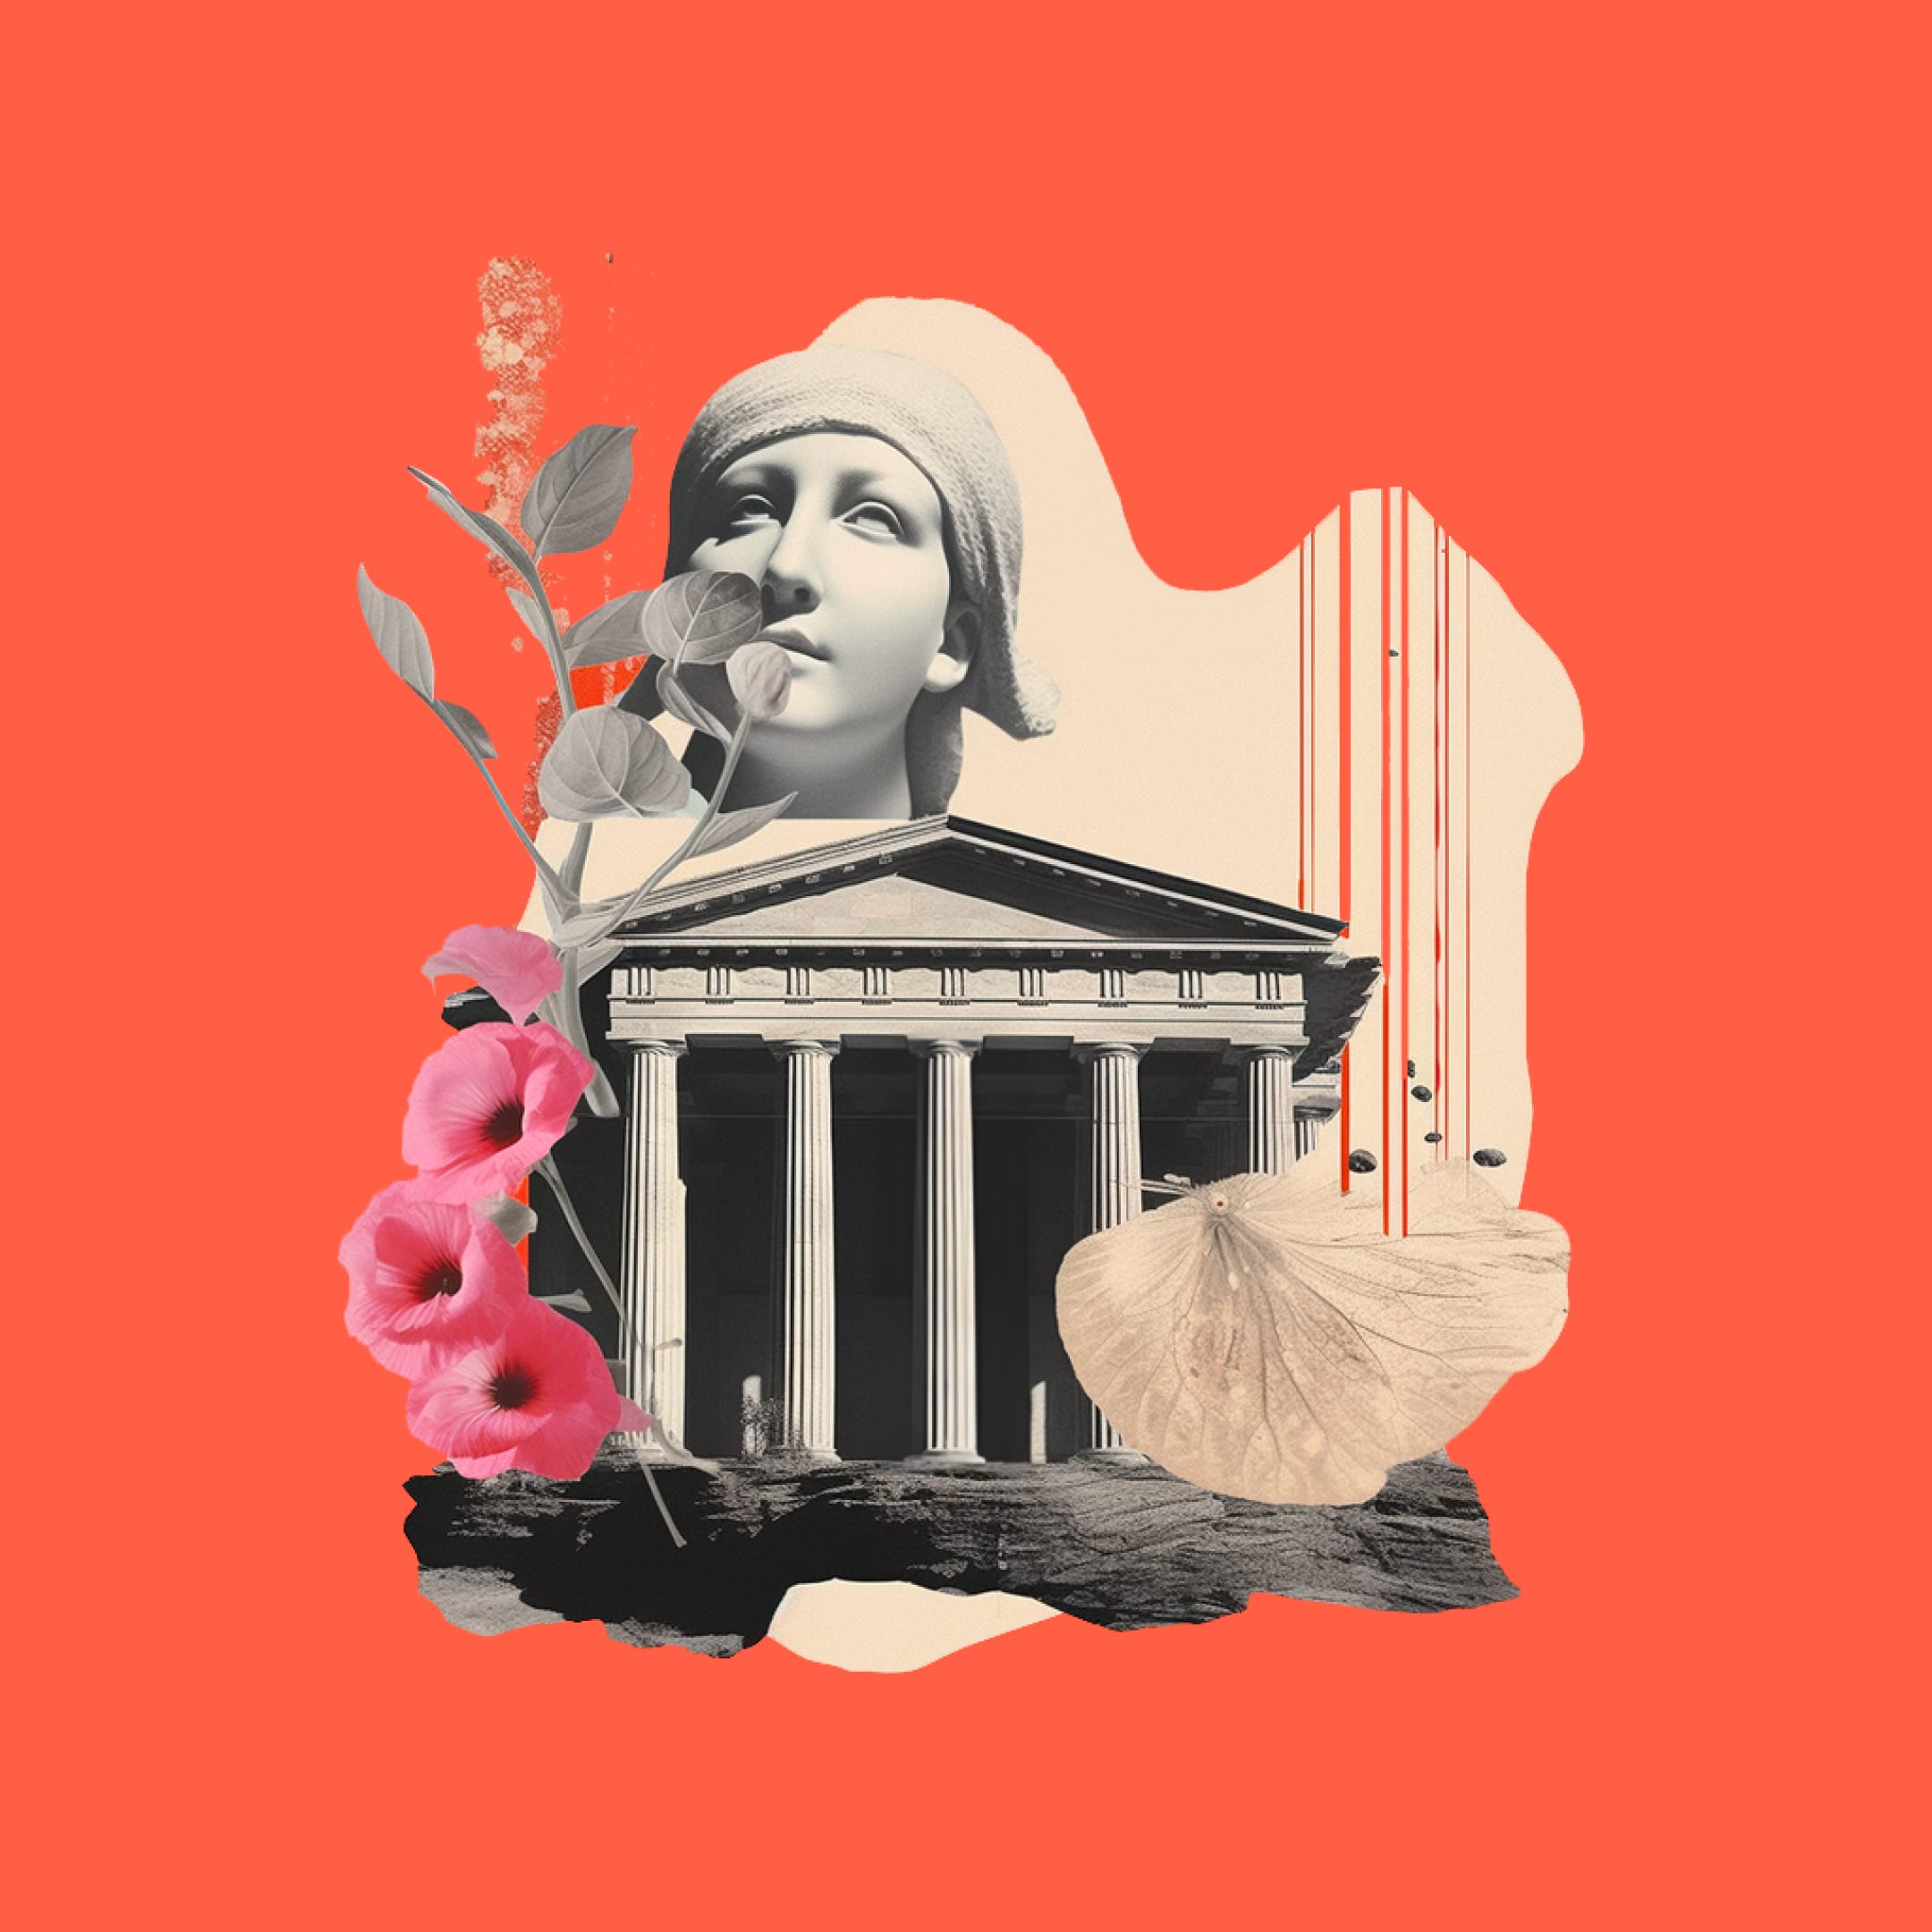 In the midst of an orange background, a historical figure crafted in stone, embellished with delicate floral elements, stands proudly on a beige platform before a bank cut-out.